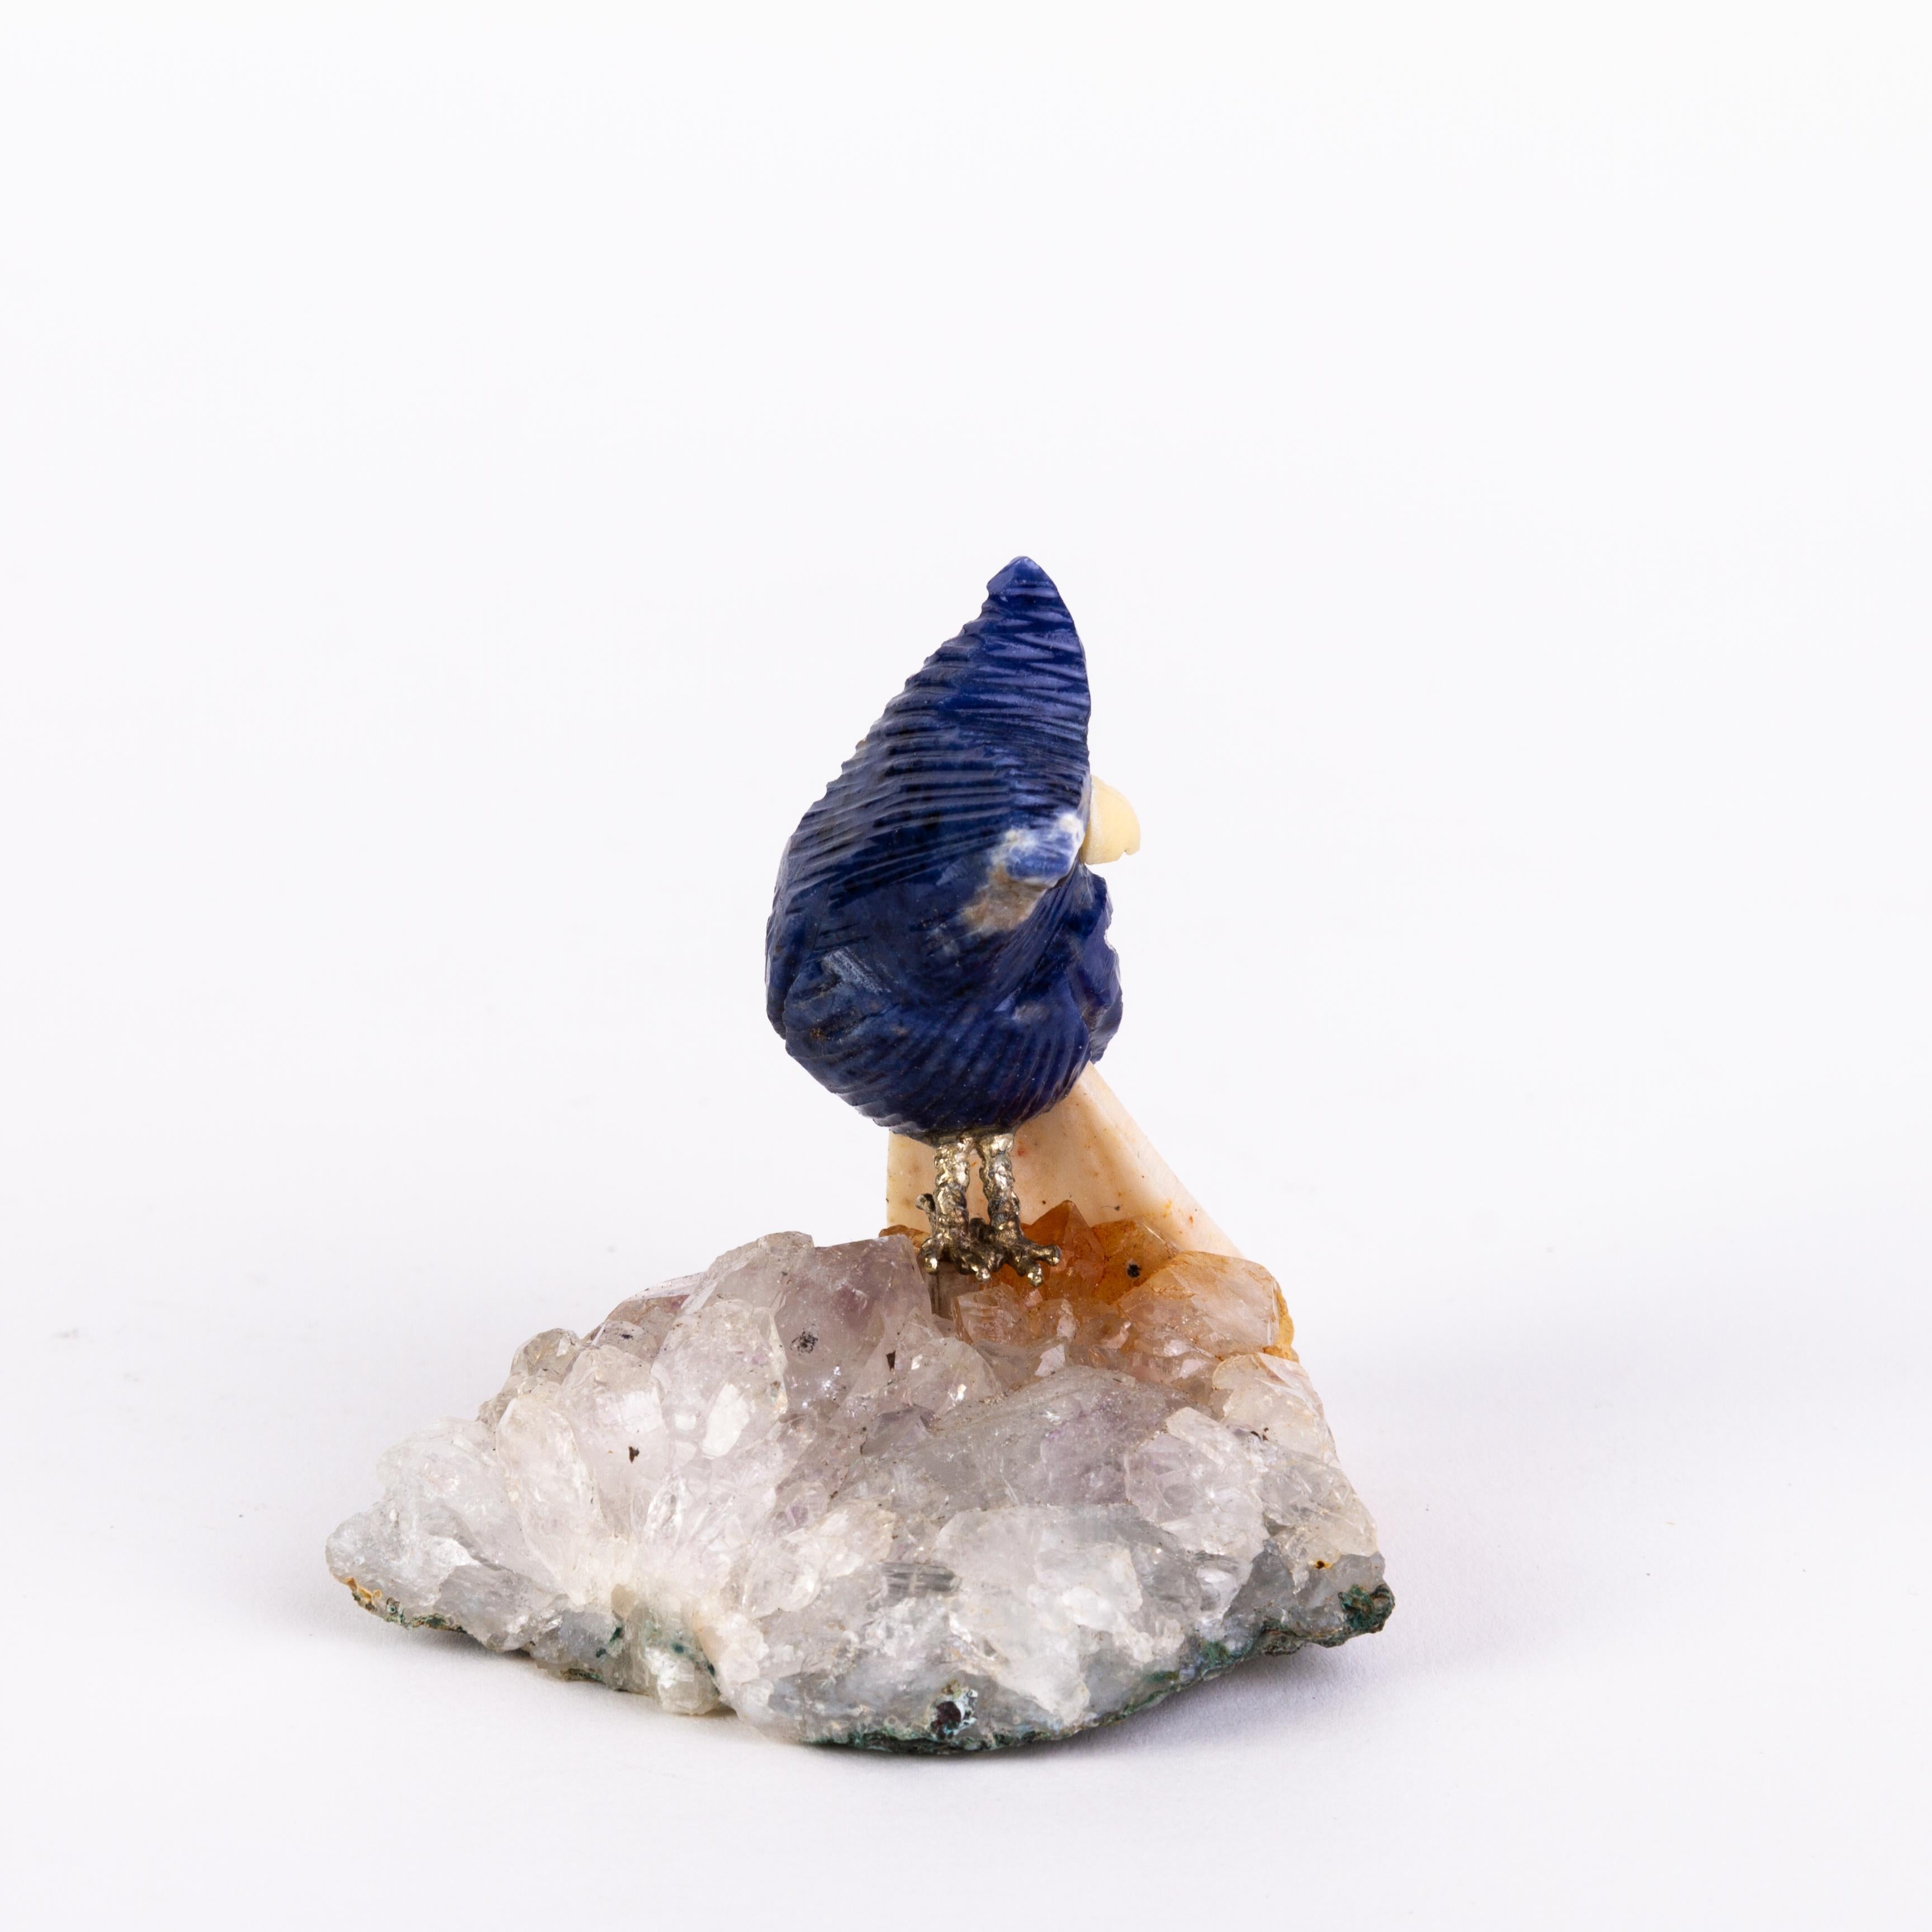 Carved Quartz Geode Gemstone & Lapis Hardstone Owl Bird Sculpture 
Good condition 
From a private collection.
Free international shipping.